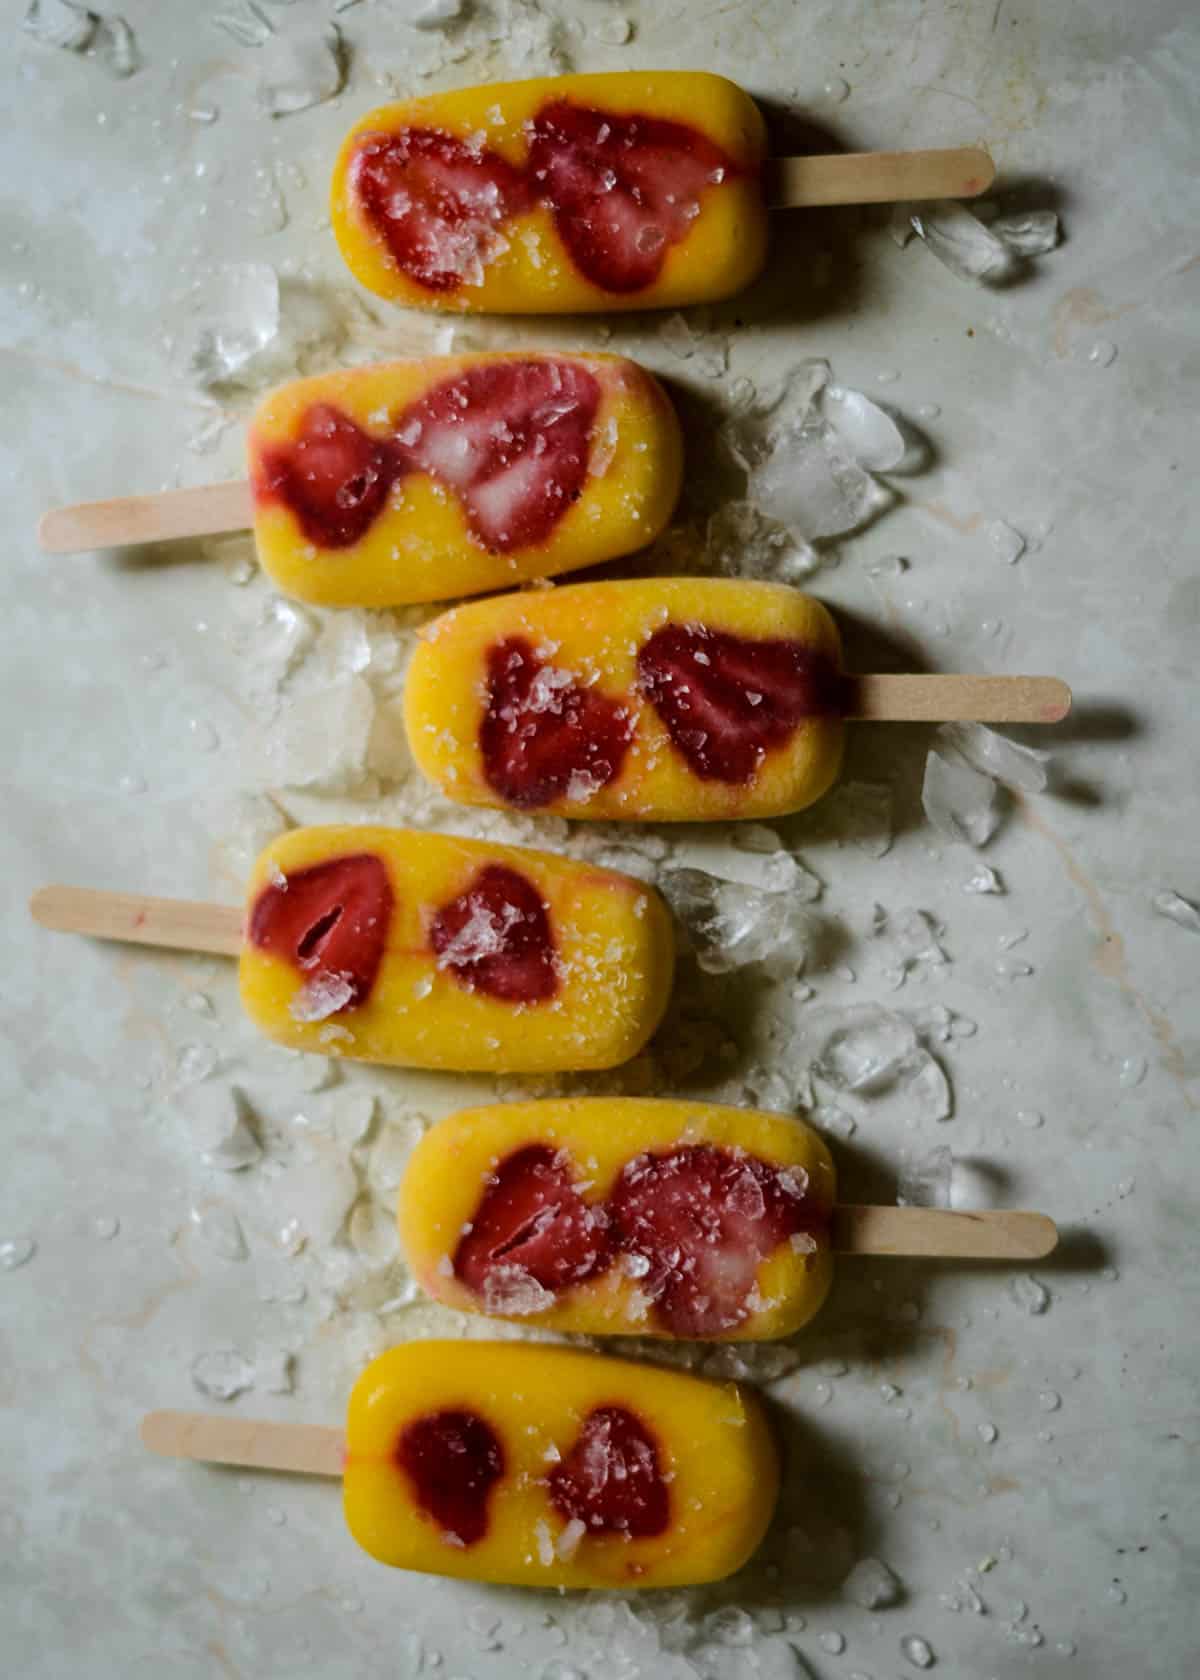 Six mango strawberry, bright yellow and red popsicles with ice.